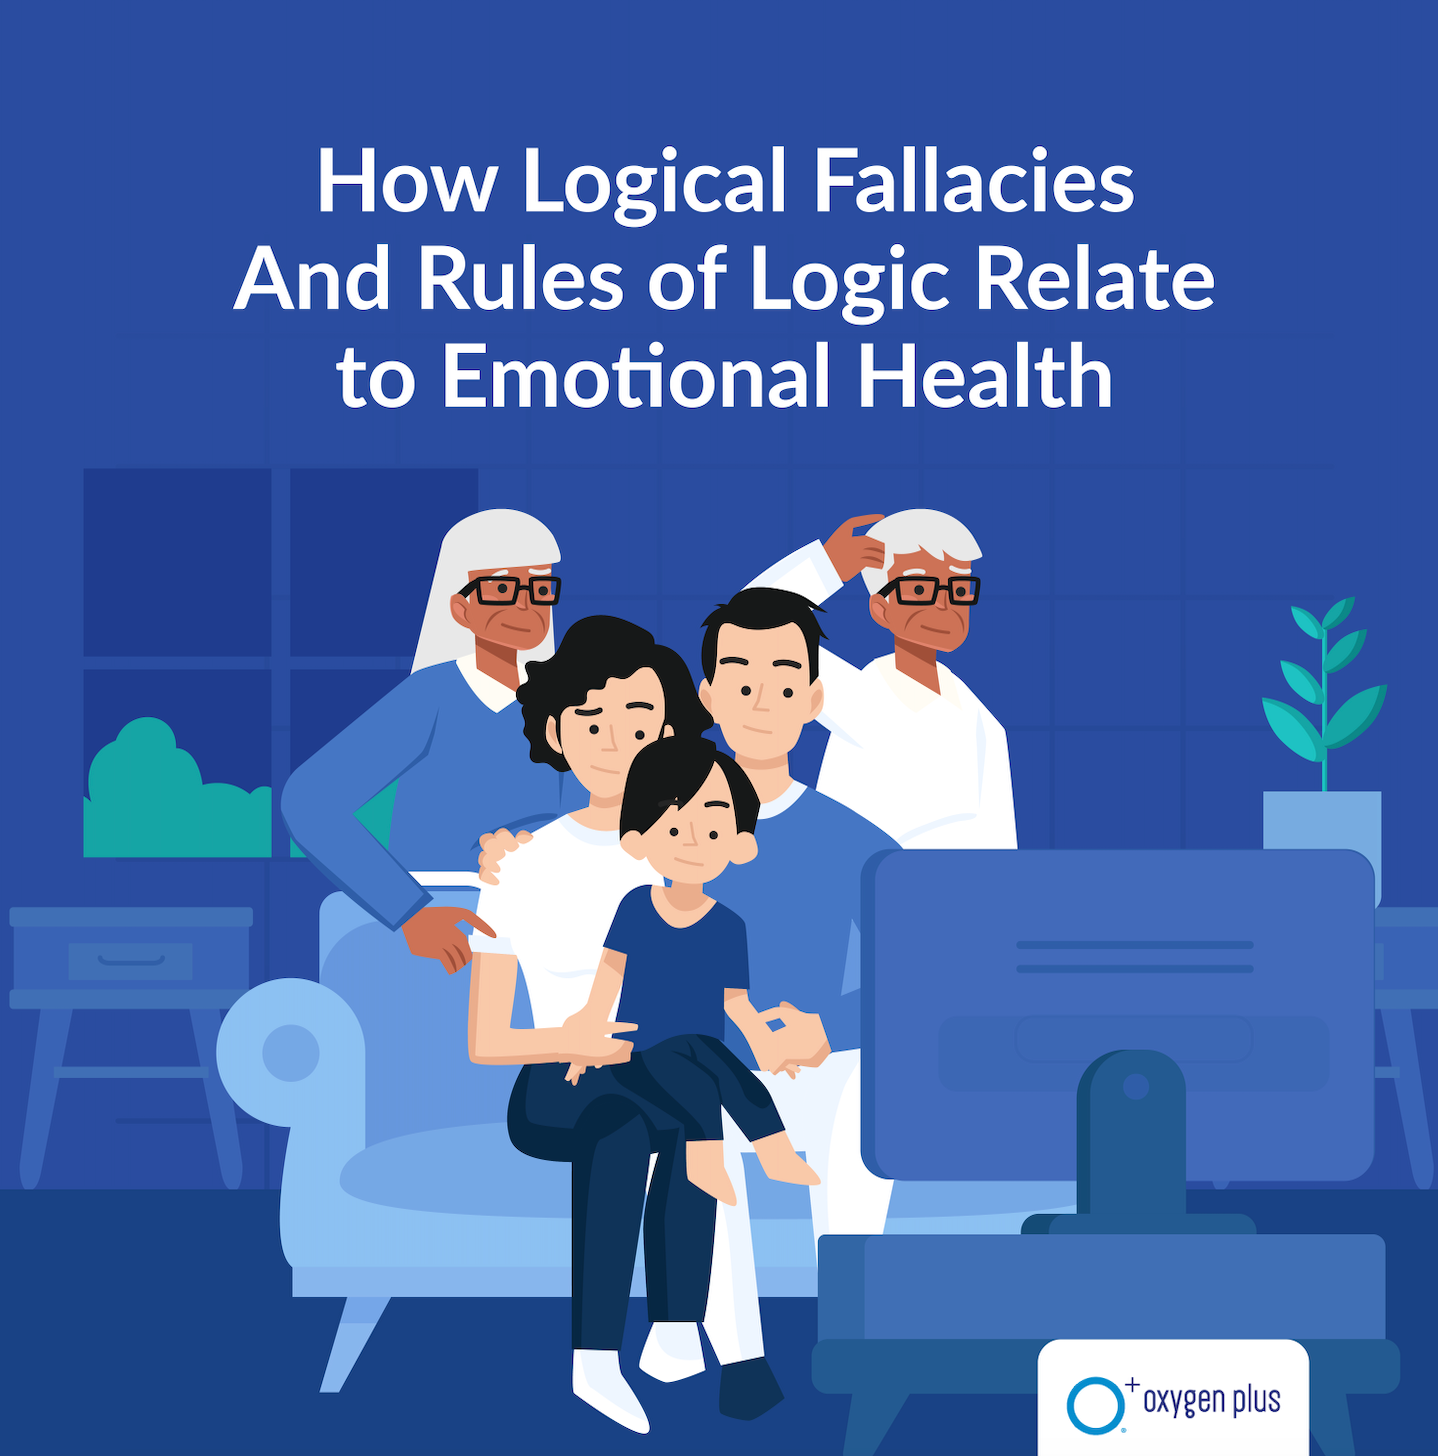 How Logical Fallacies And Rules of Logic Relate to Emotional Health